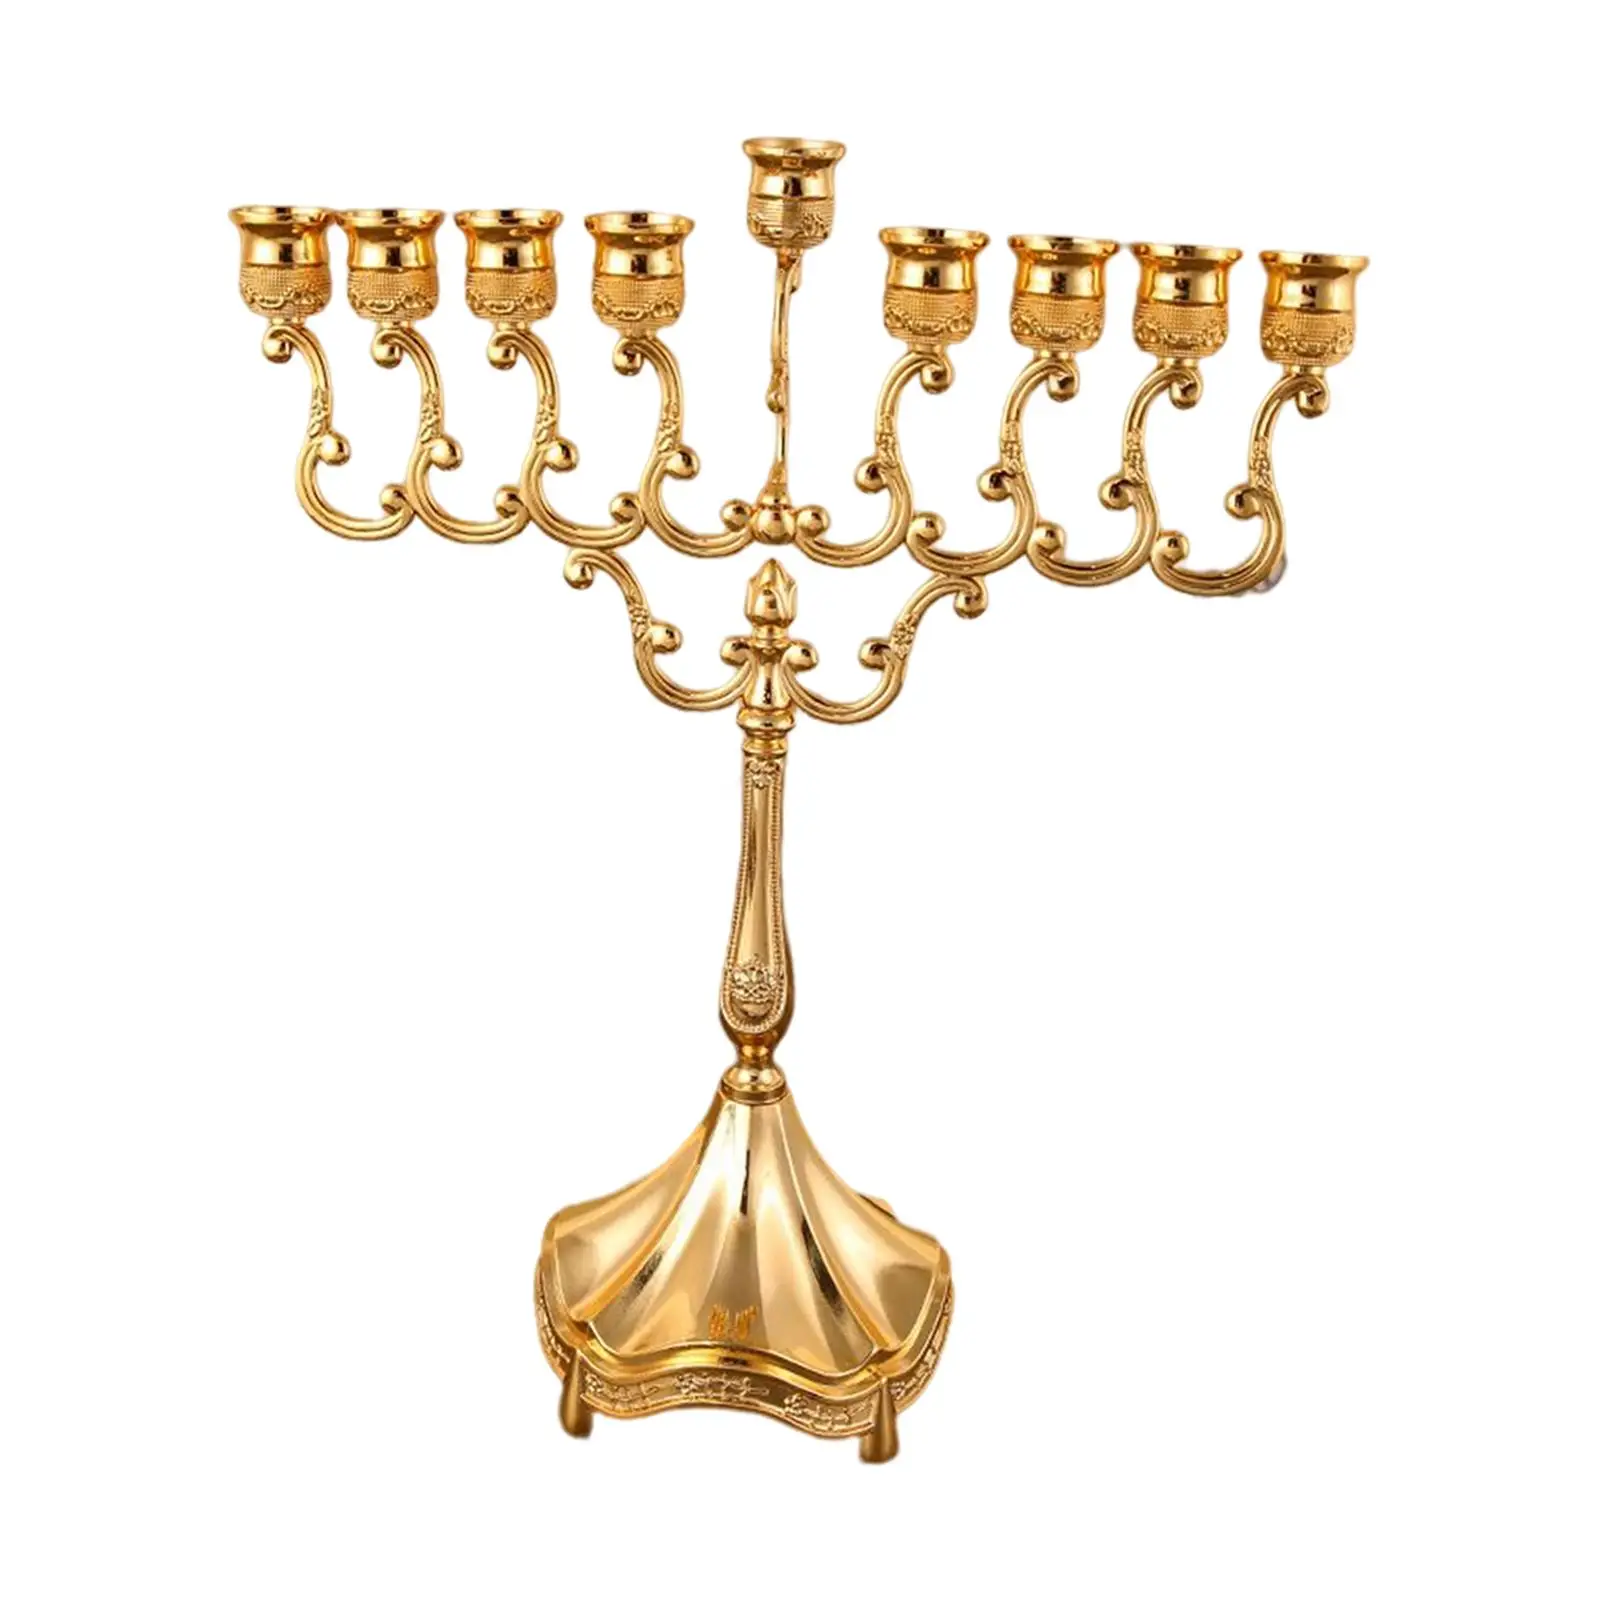 9 Branches Candle Holder Tabletop Candelabrum Candle Stands Hanukkah Menorah for Christmas Party Wedding Home Decor Gift